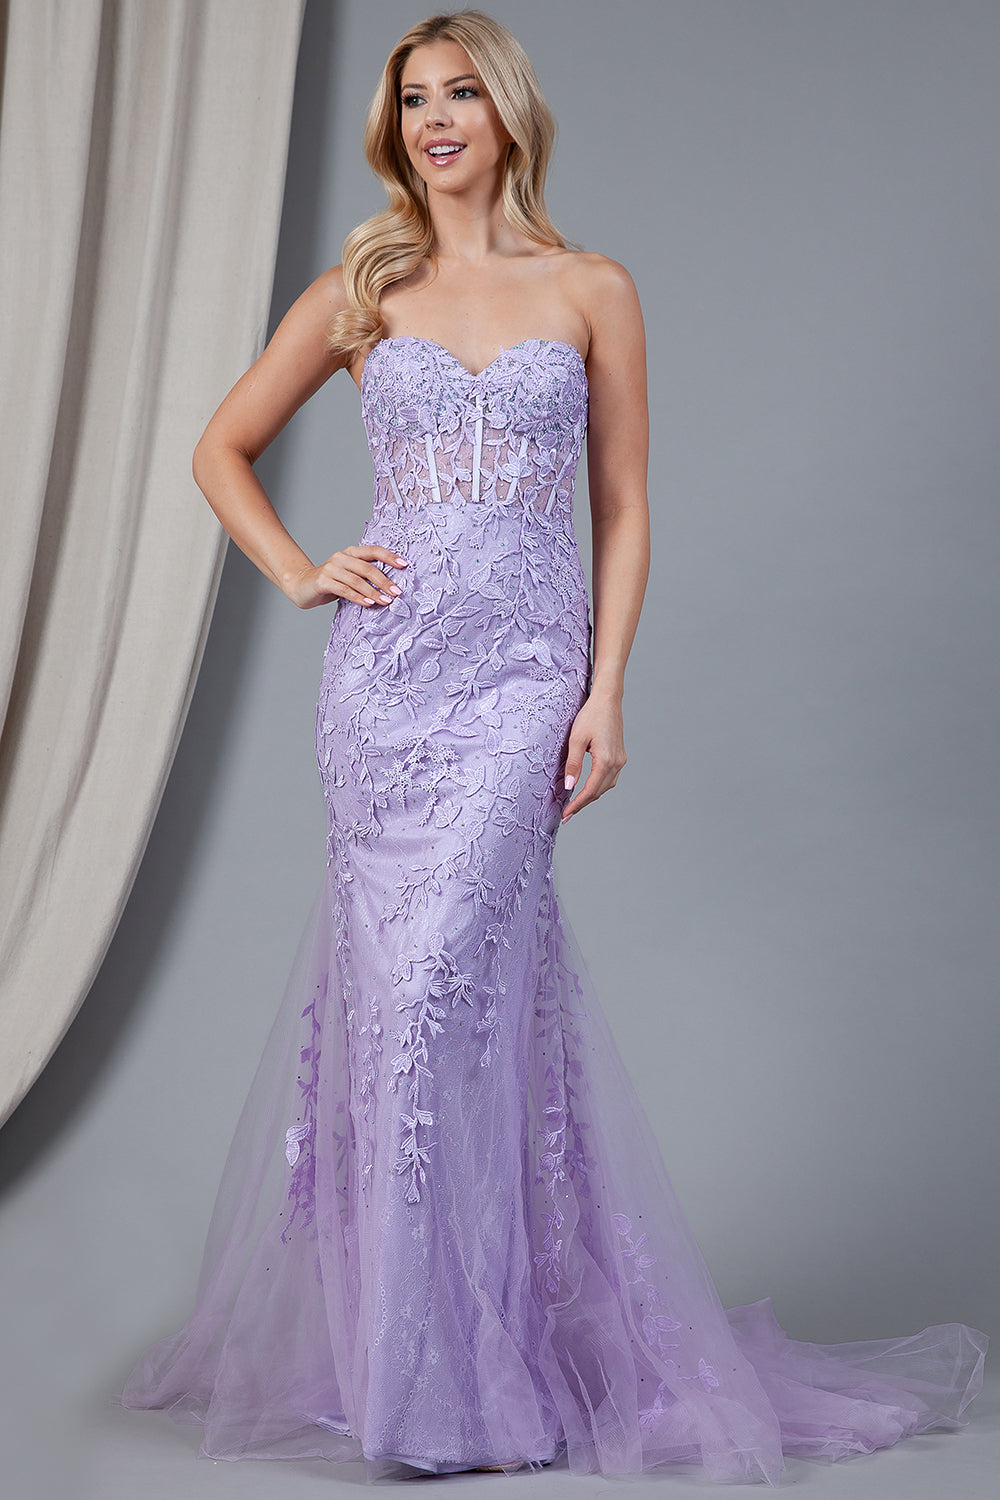 Embroidered Lace Long Prom Dress, Mermaid Strapless-smcdress